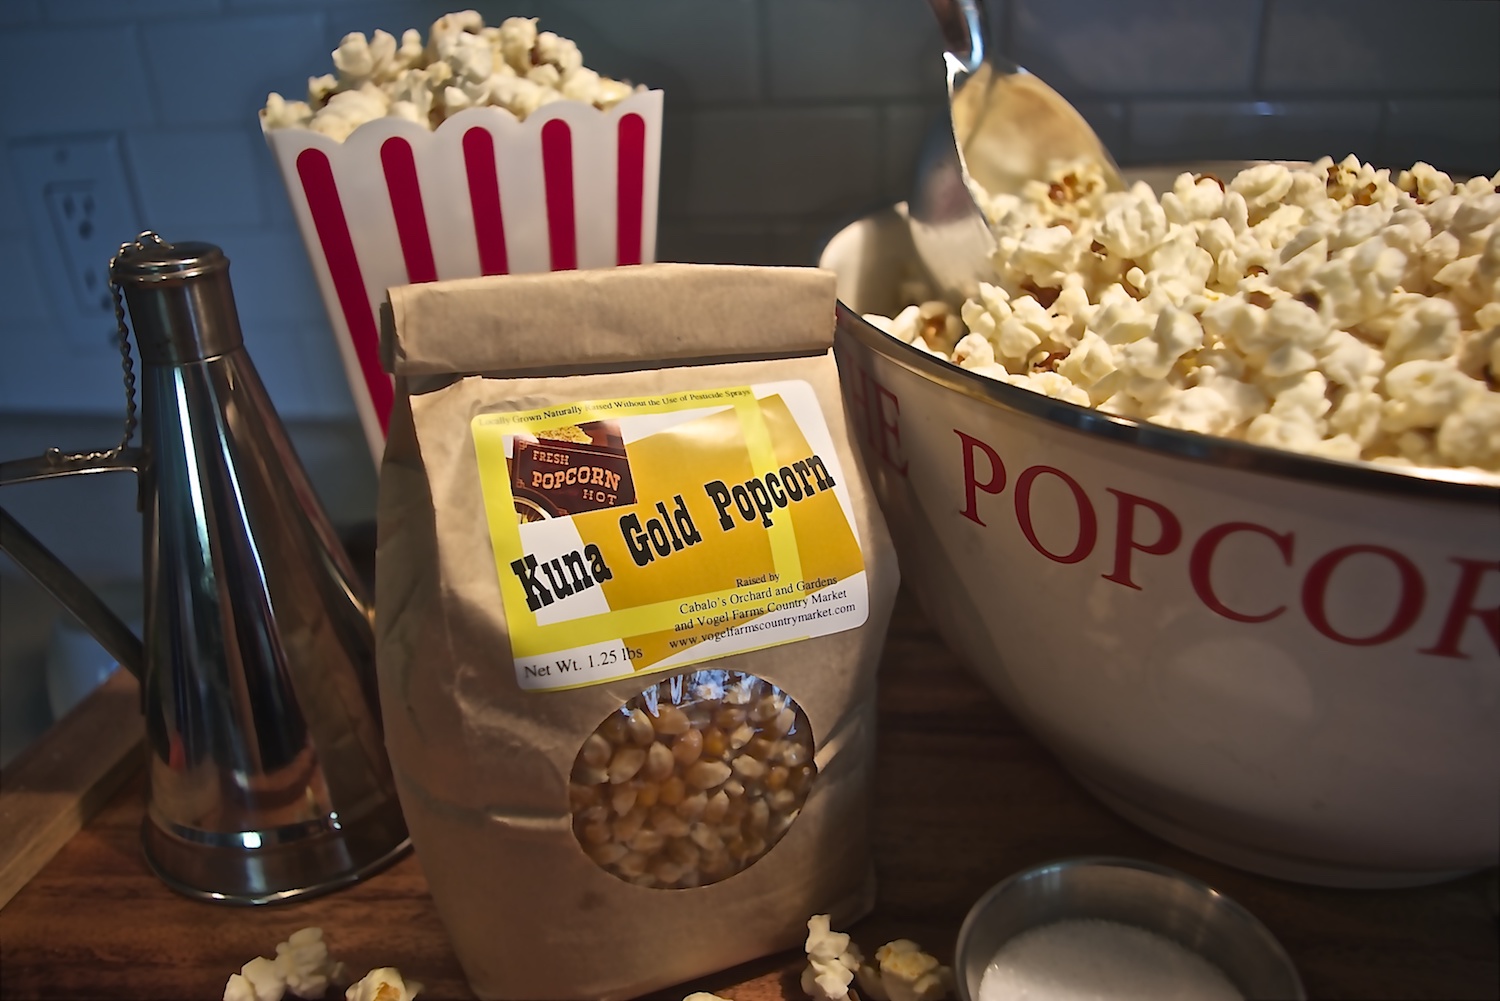 Kuna Popcorn is the love child of Vogel Farms and Cabalo’s Orchard and Gardens in Kuna, Idaho.